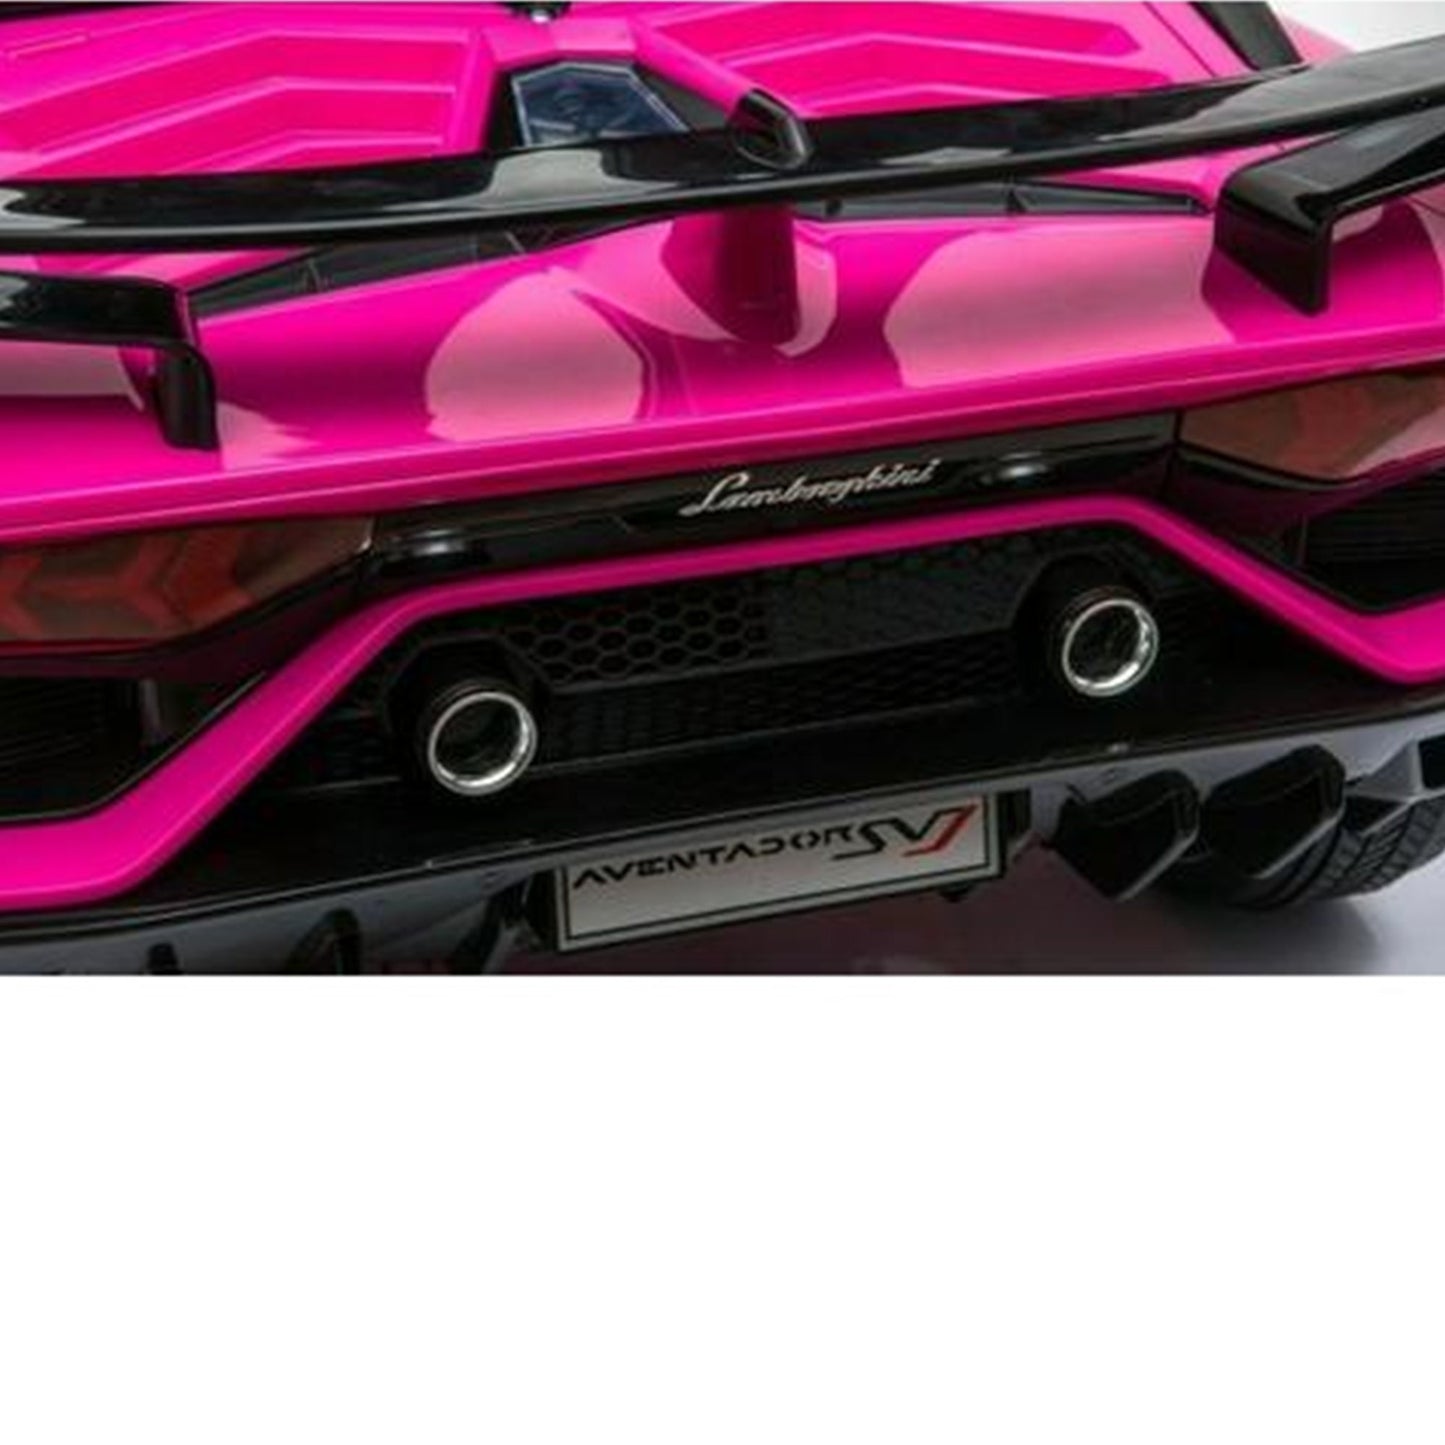 "Rear view of a Pink Lamborghini SVJ 12 Volt Electric Ride-On from Kids Car with 2.4G Parent Remote control."